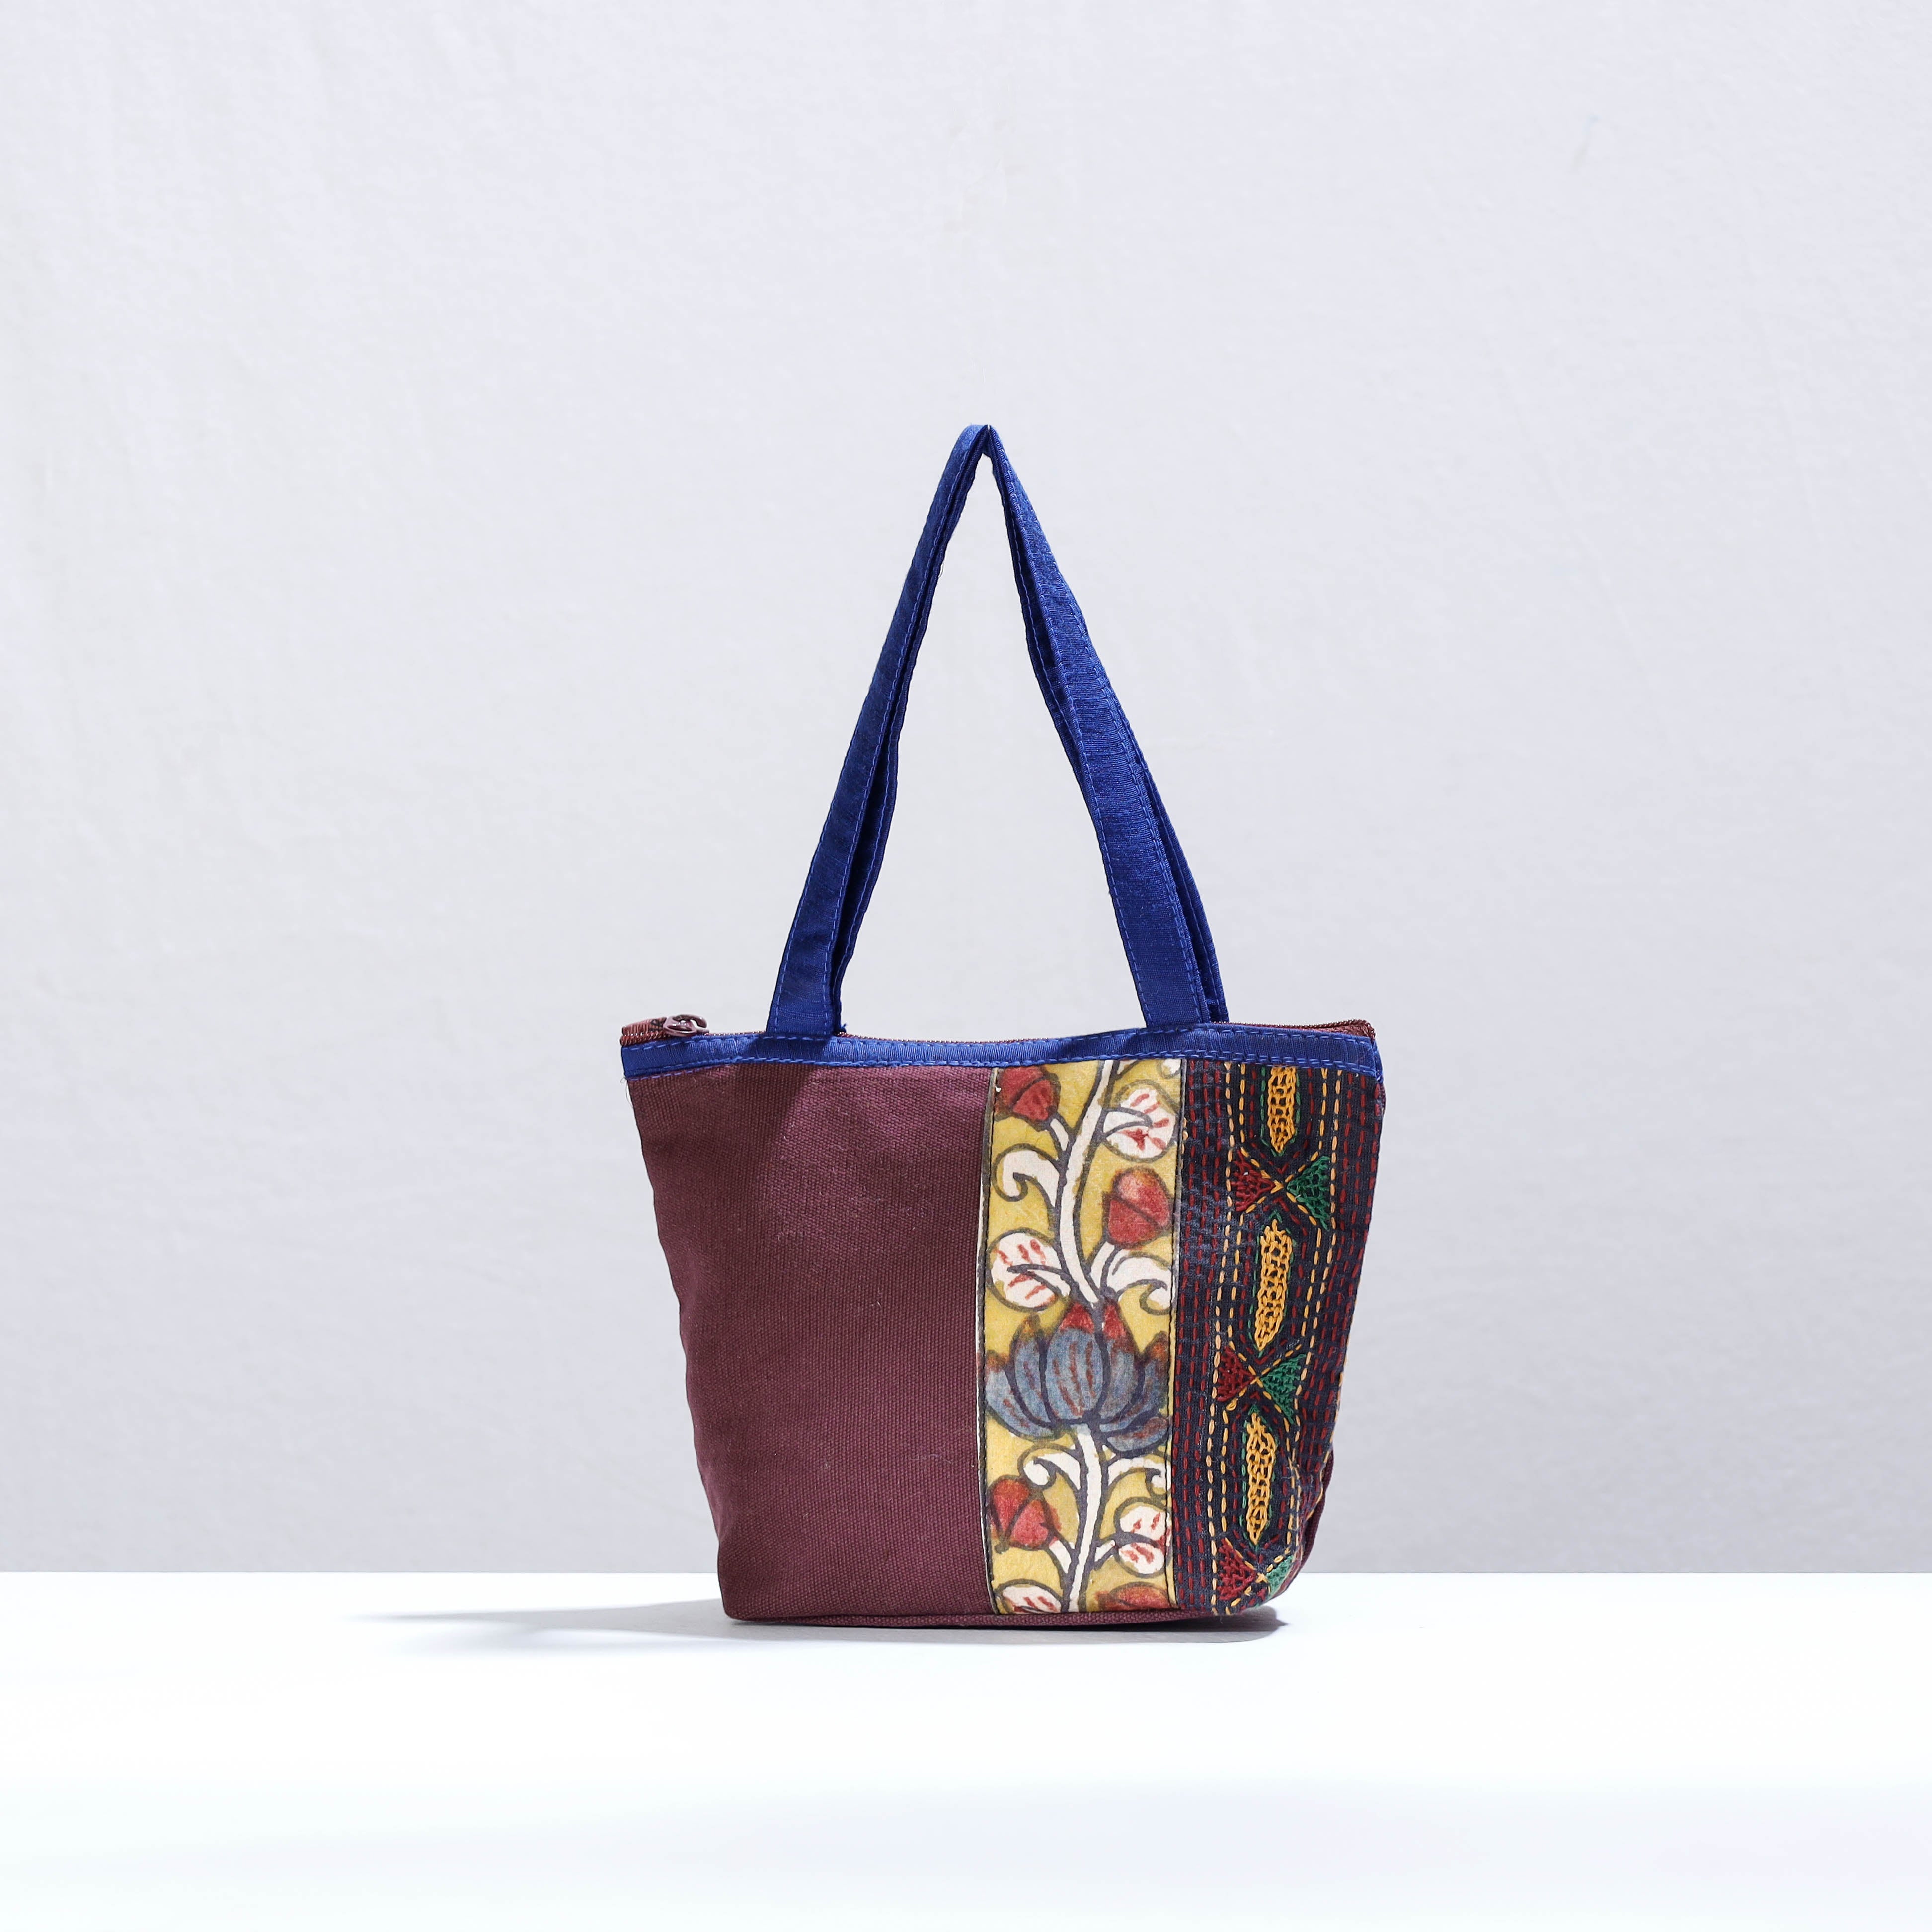 INDHA Maroon Colour Kalamkari Printed Cross Body Sling Bag for Girls/Womens  - Curated online shop for handcrafted products made in India by women  artisans